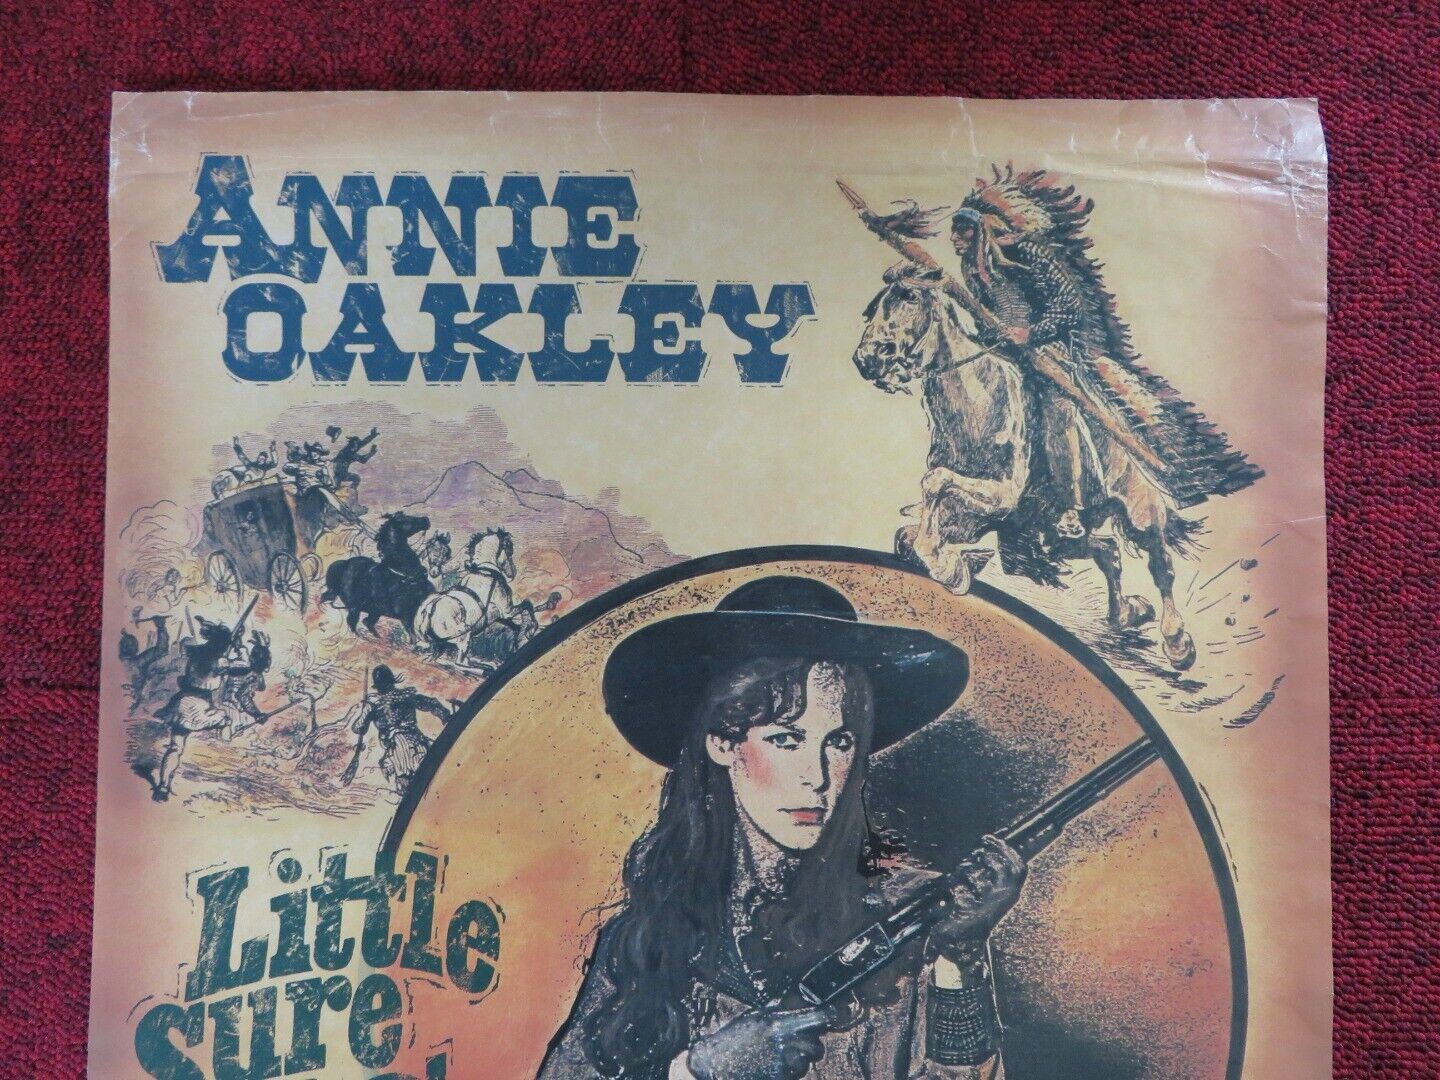 TALL TALES AND LEGENDS - ANNIE OAKLEY  VHS (14